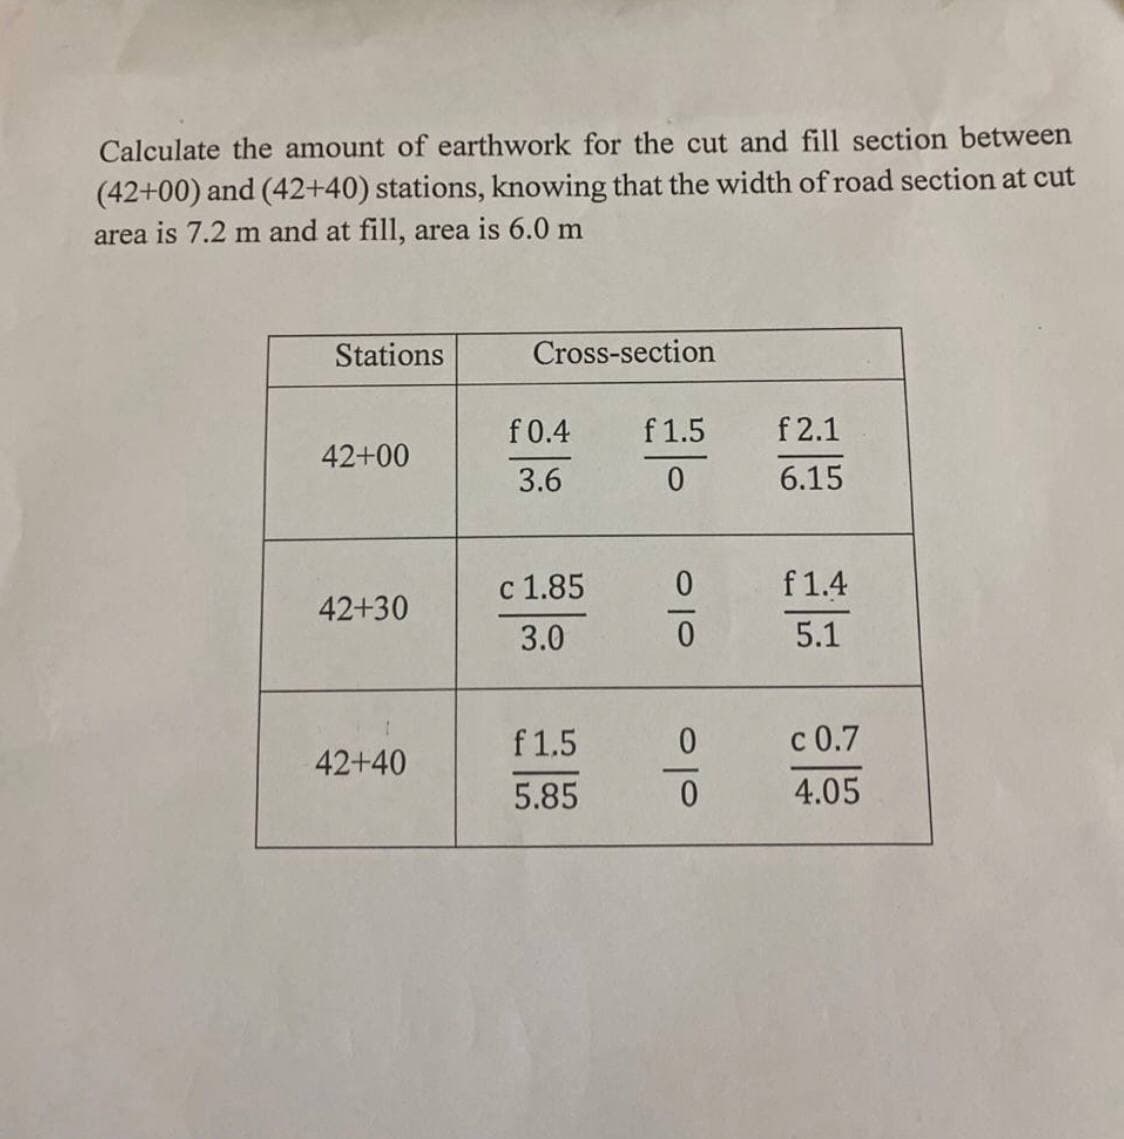 Calculate the amount of earthwork for the cut and fill section between
(42+00) and (42+40) stations, knowing that the width of road section at cut
area is 7.2 m and at fill, area is 6.0 m
Stations
Cross-section
f 0.4
f 1.5
f 2.1
42+00
3.6
6.15
c 1.85
f1.4
42+30
3.0
5.1
f 1.5
c 0.7
42+40
5.85
4.05
이ㅇ
이이
